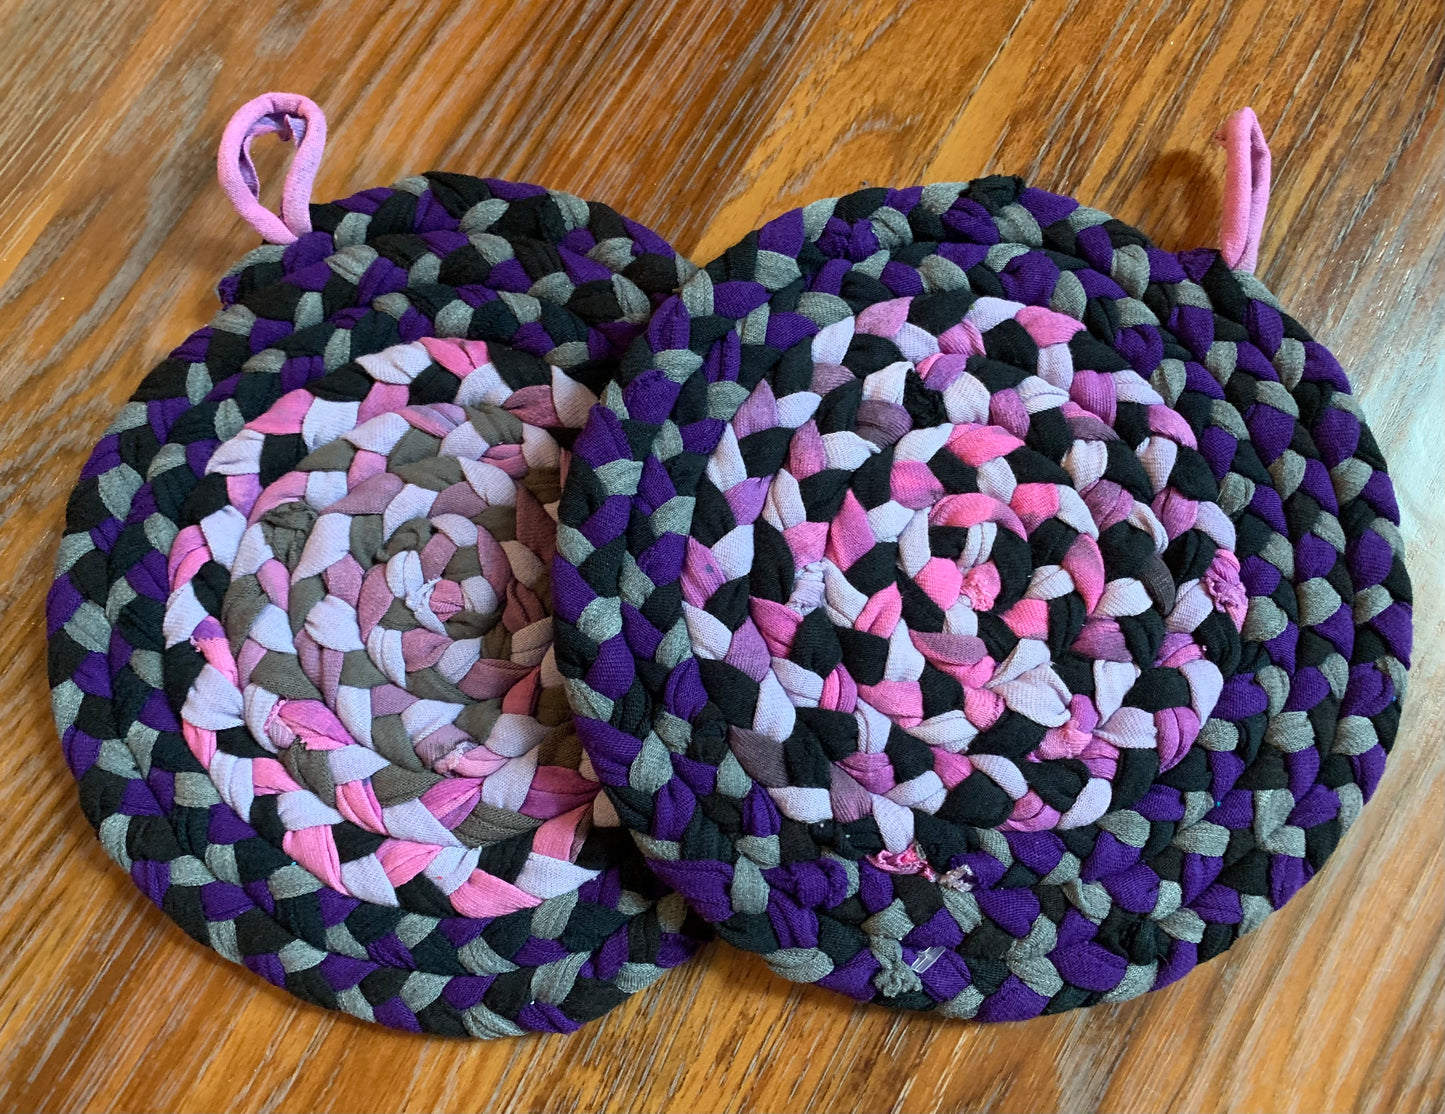 A set of two trivet potholders, side by side, lay flat on a wood surface.